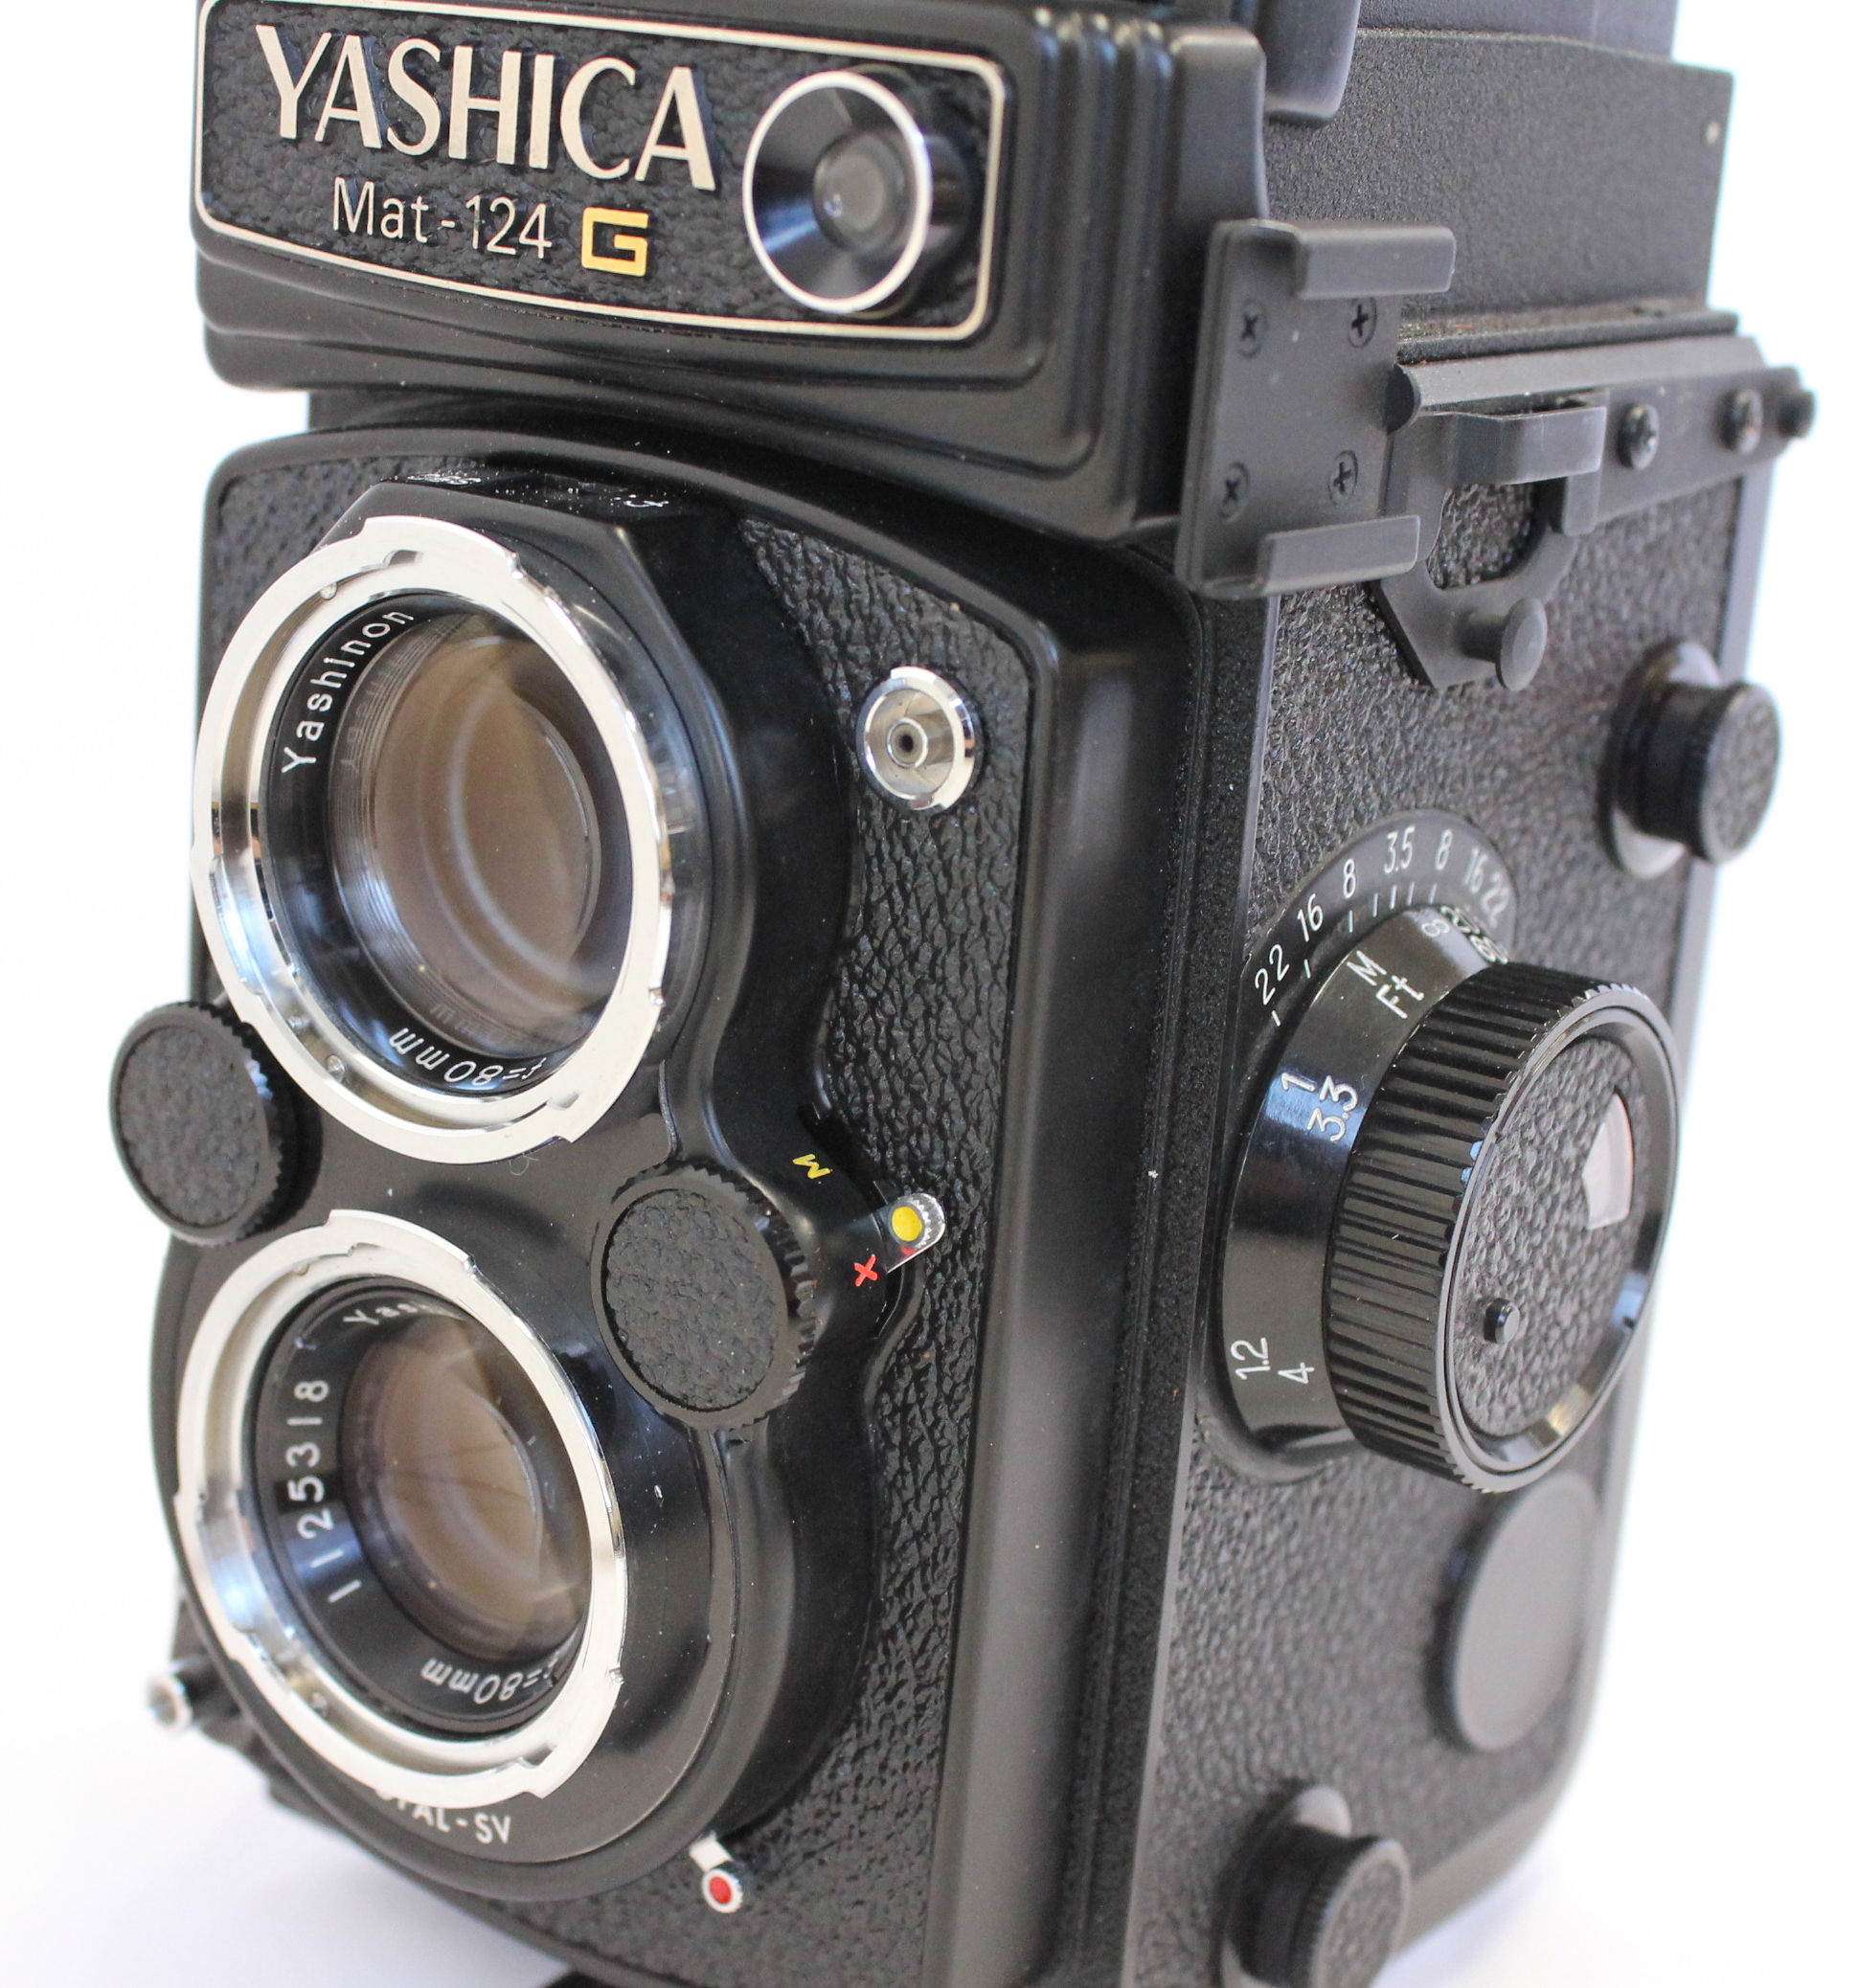  YASHICA MAT 124 G 6x6 TLR Medium Format Camera with 80mm F/3.5 Lens from Japan Photo 9